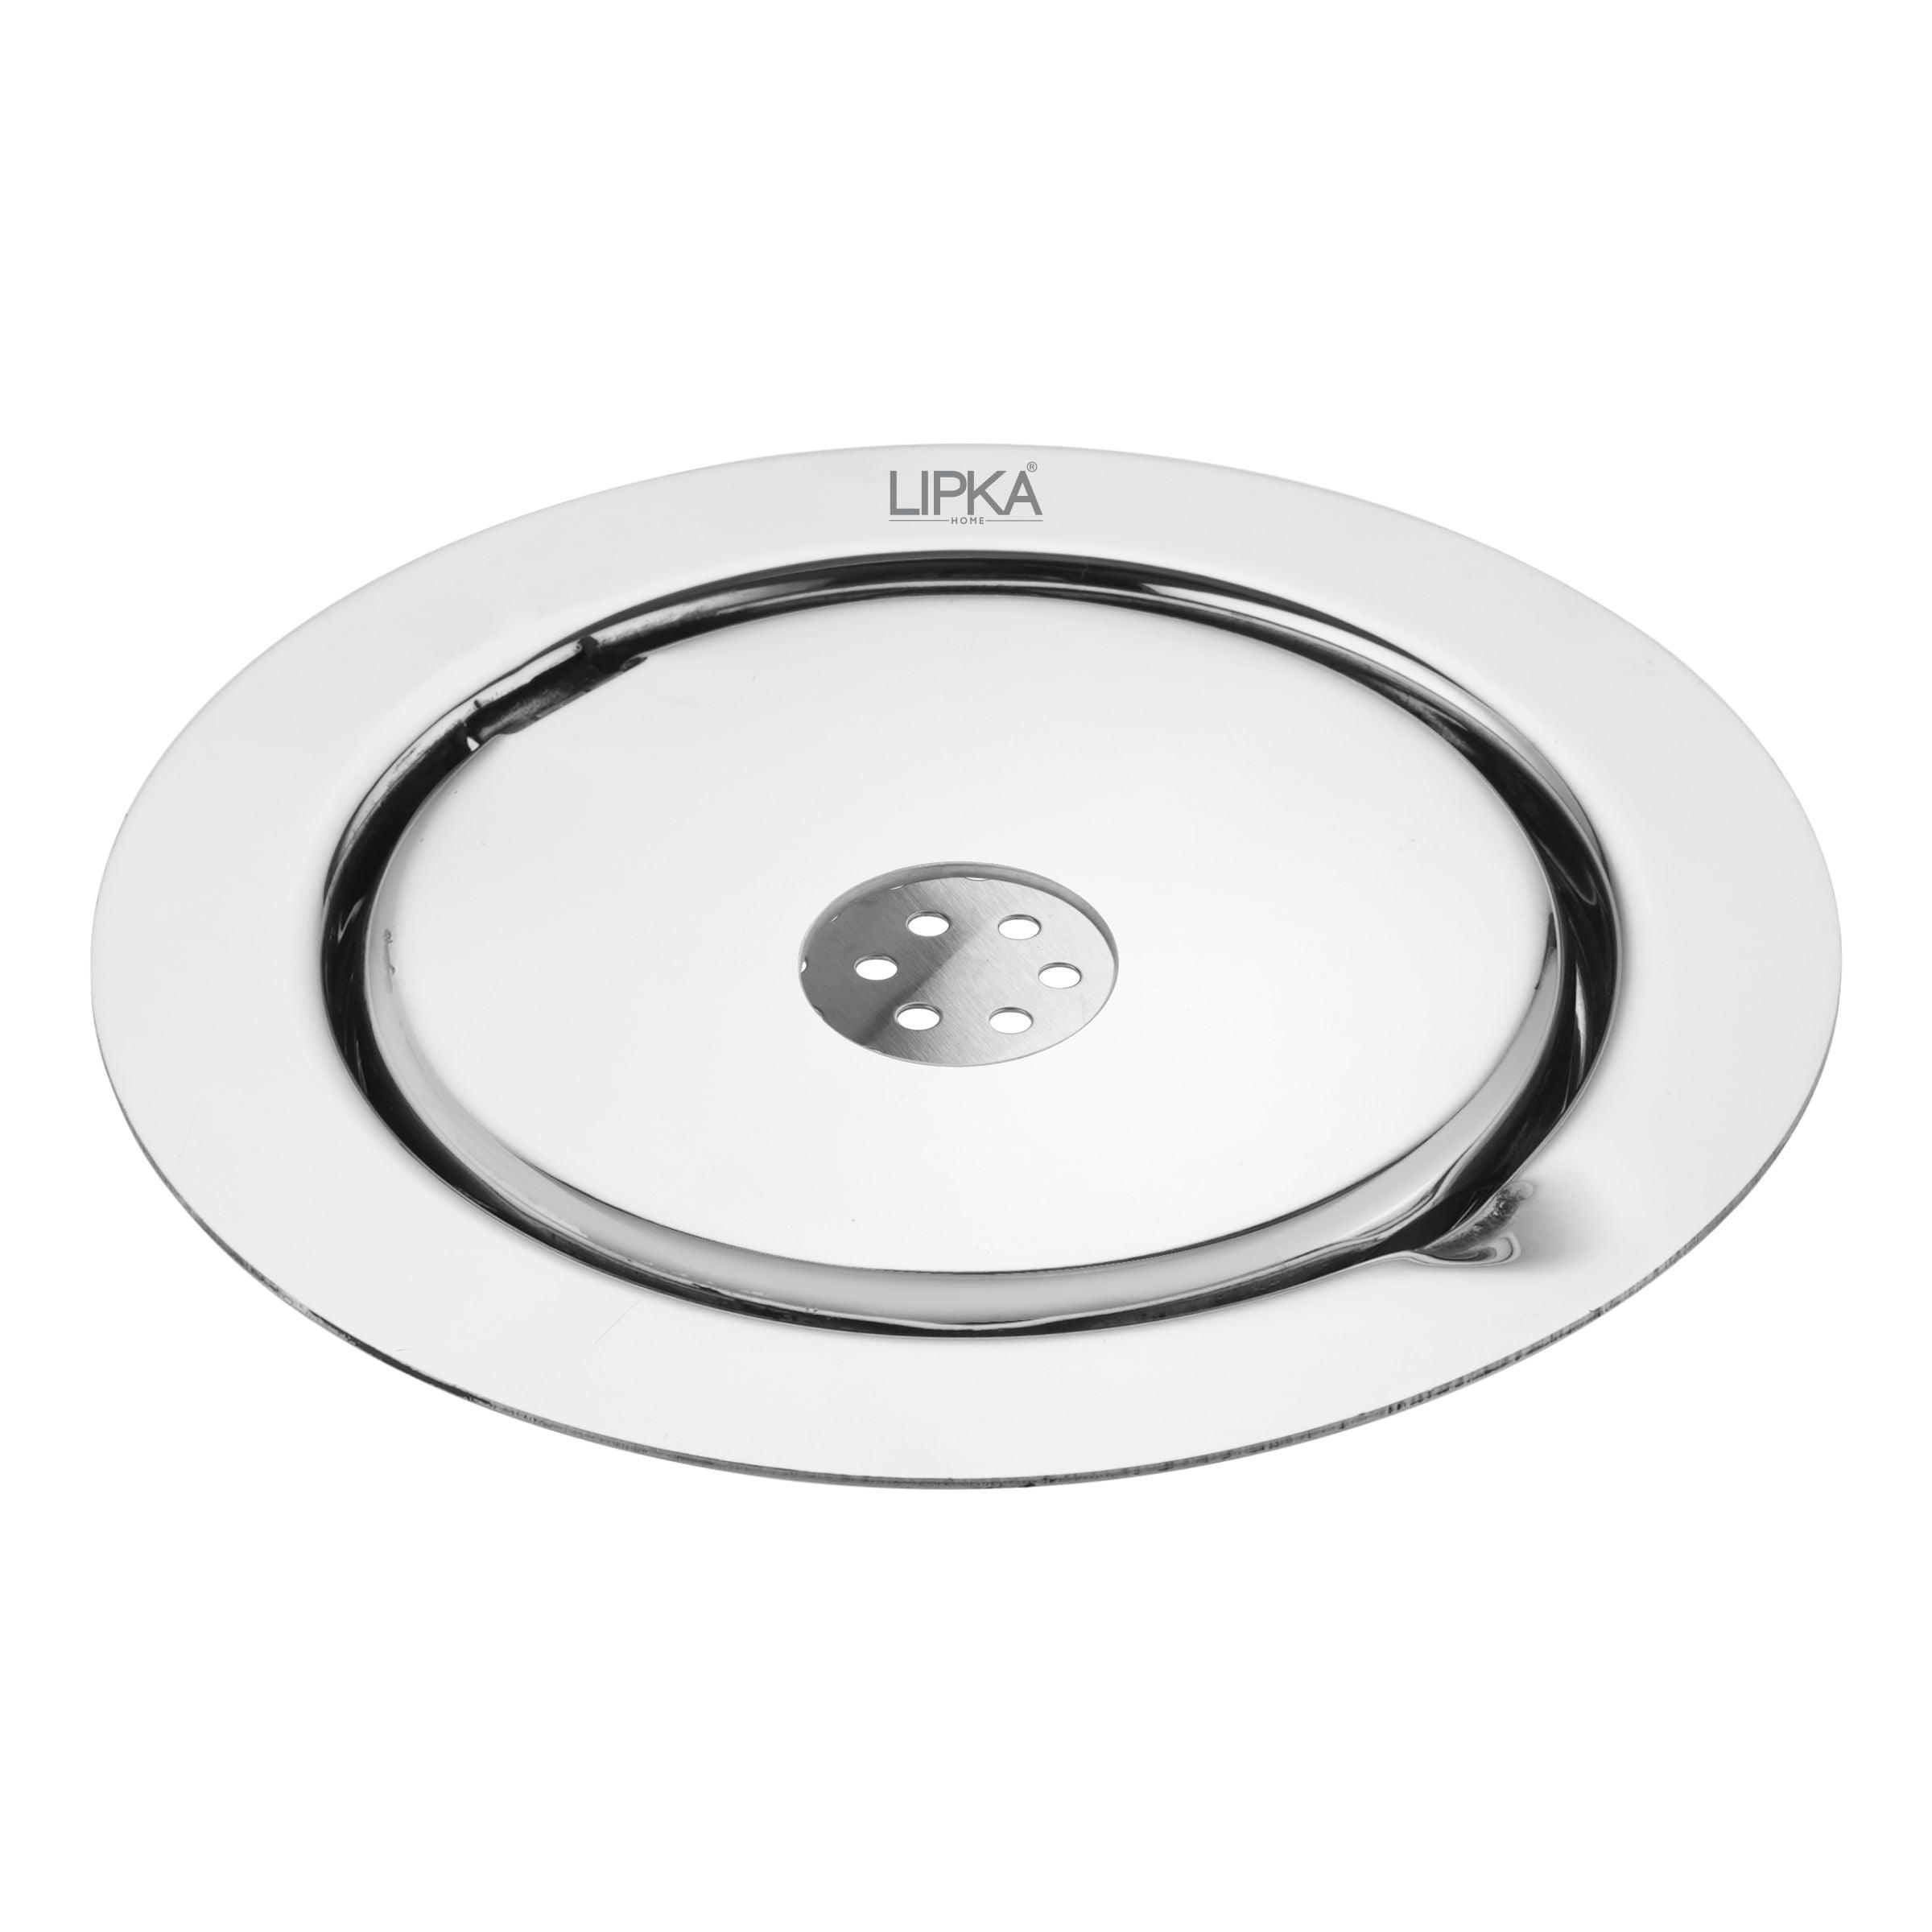 Gemini Round Floor Drain with Jali & Hole (5 inches) 